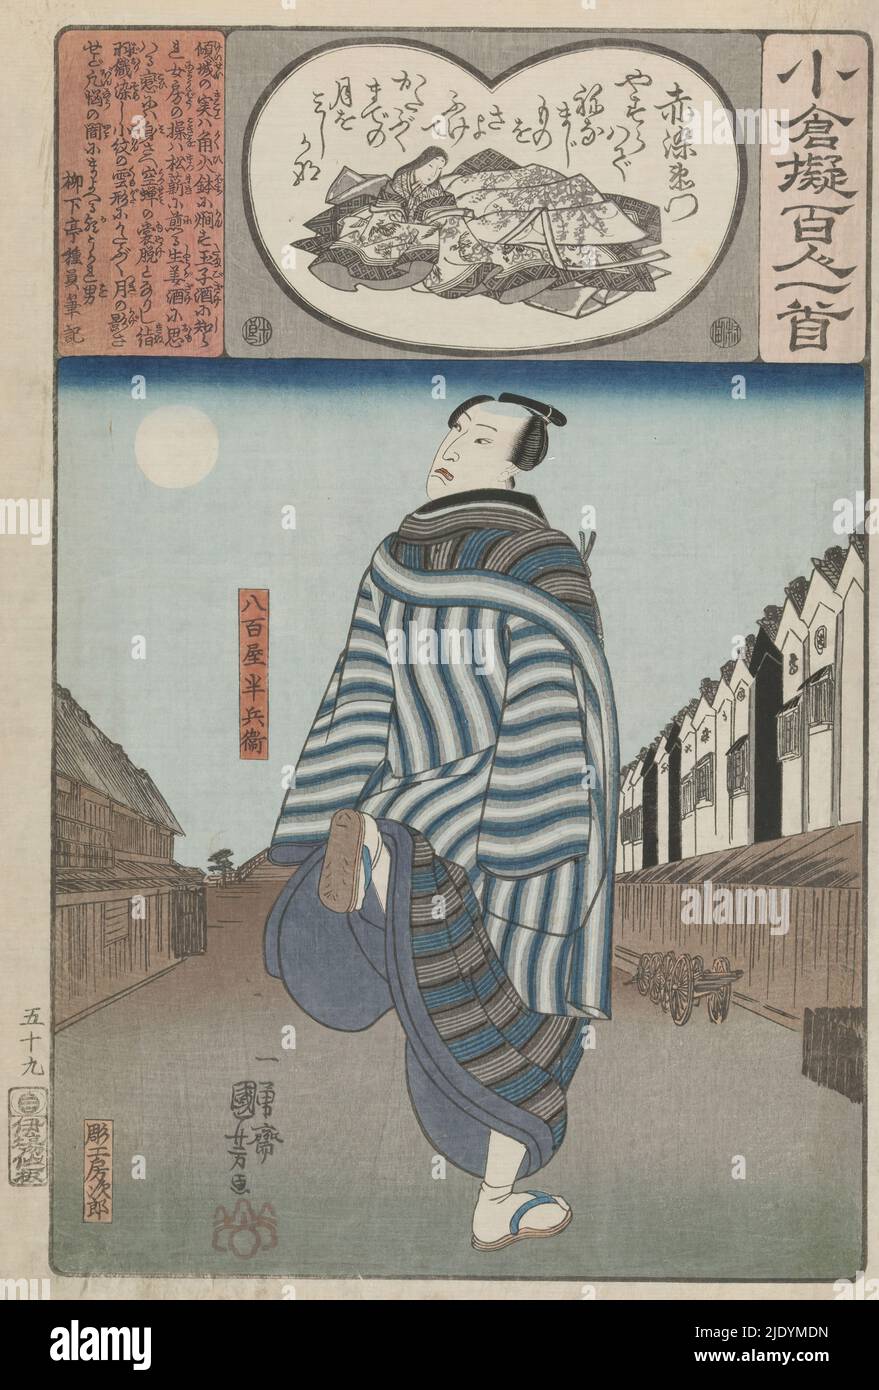 Ogura Imitation of the One Hundred Poems (series title), Yaoya Hanbei running between department stores, on his way to his wife. Scene from a kabuki play. Poem by Murasaki Shikibu.Poem by Akazome Emon., print maker: Utagawa Kuniyoshi, (mentioned on object), Matsushima Fusajirô, (mentioned on object), publisher: Ibaya Senzaburô, (mentioned on object), Japan, 1847 - 1850, paper, color woodcut Stock Photo